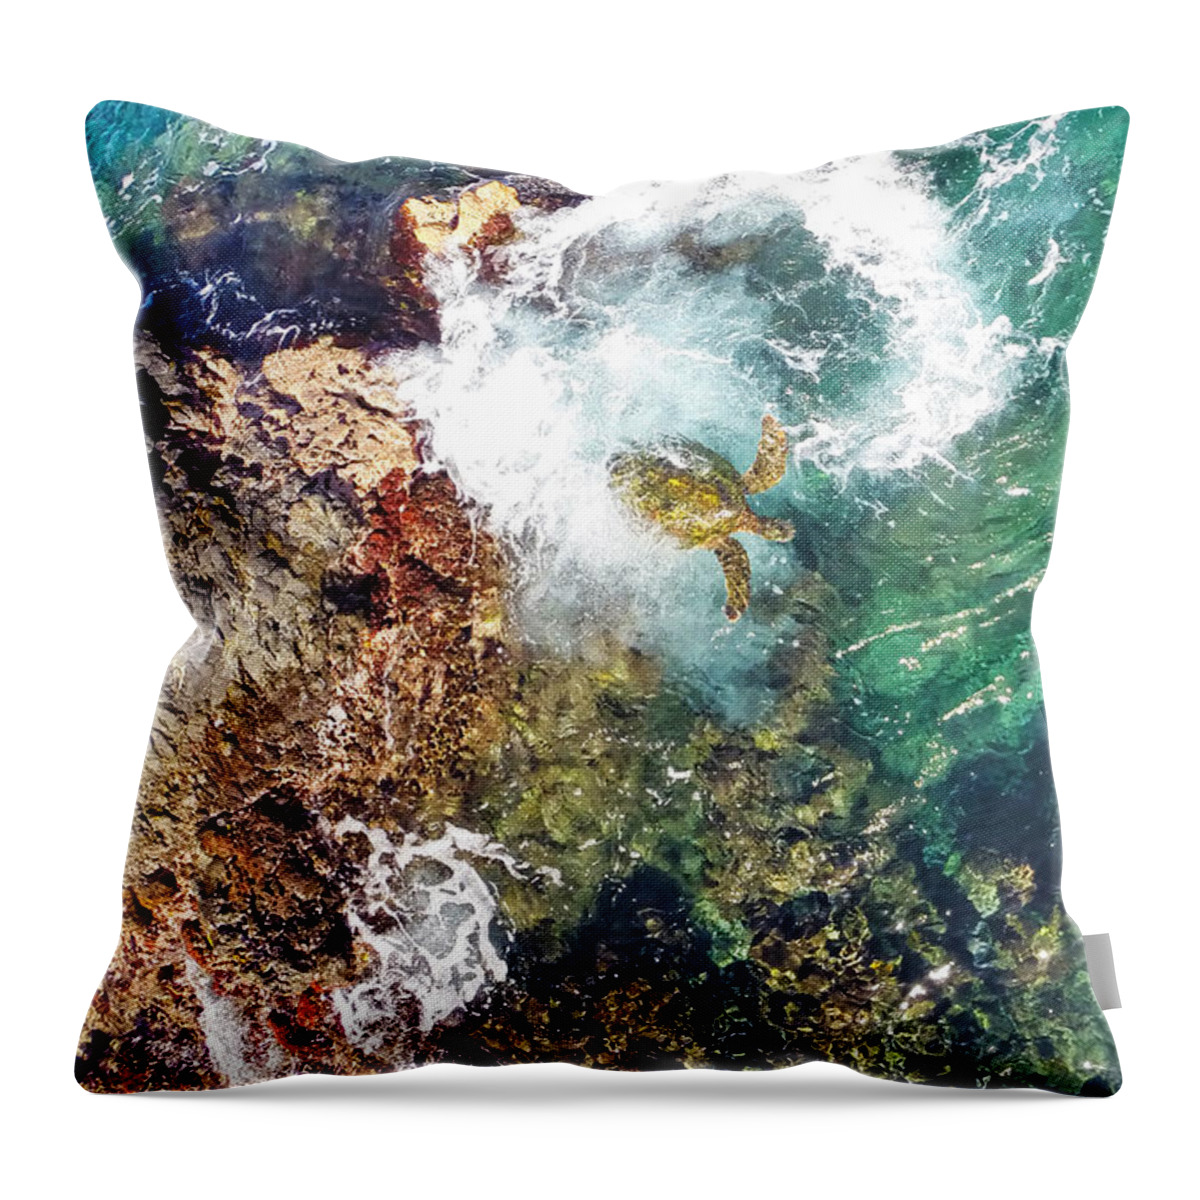 Maui Hawaii Sea Turtle Ocean Shoreline Reef Throw Pillow featuring the photograph Surfacing by James Roemmling